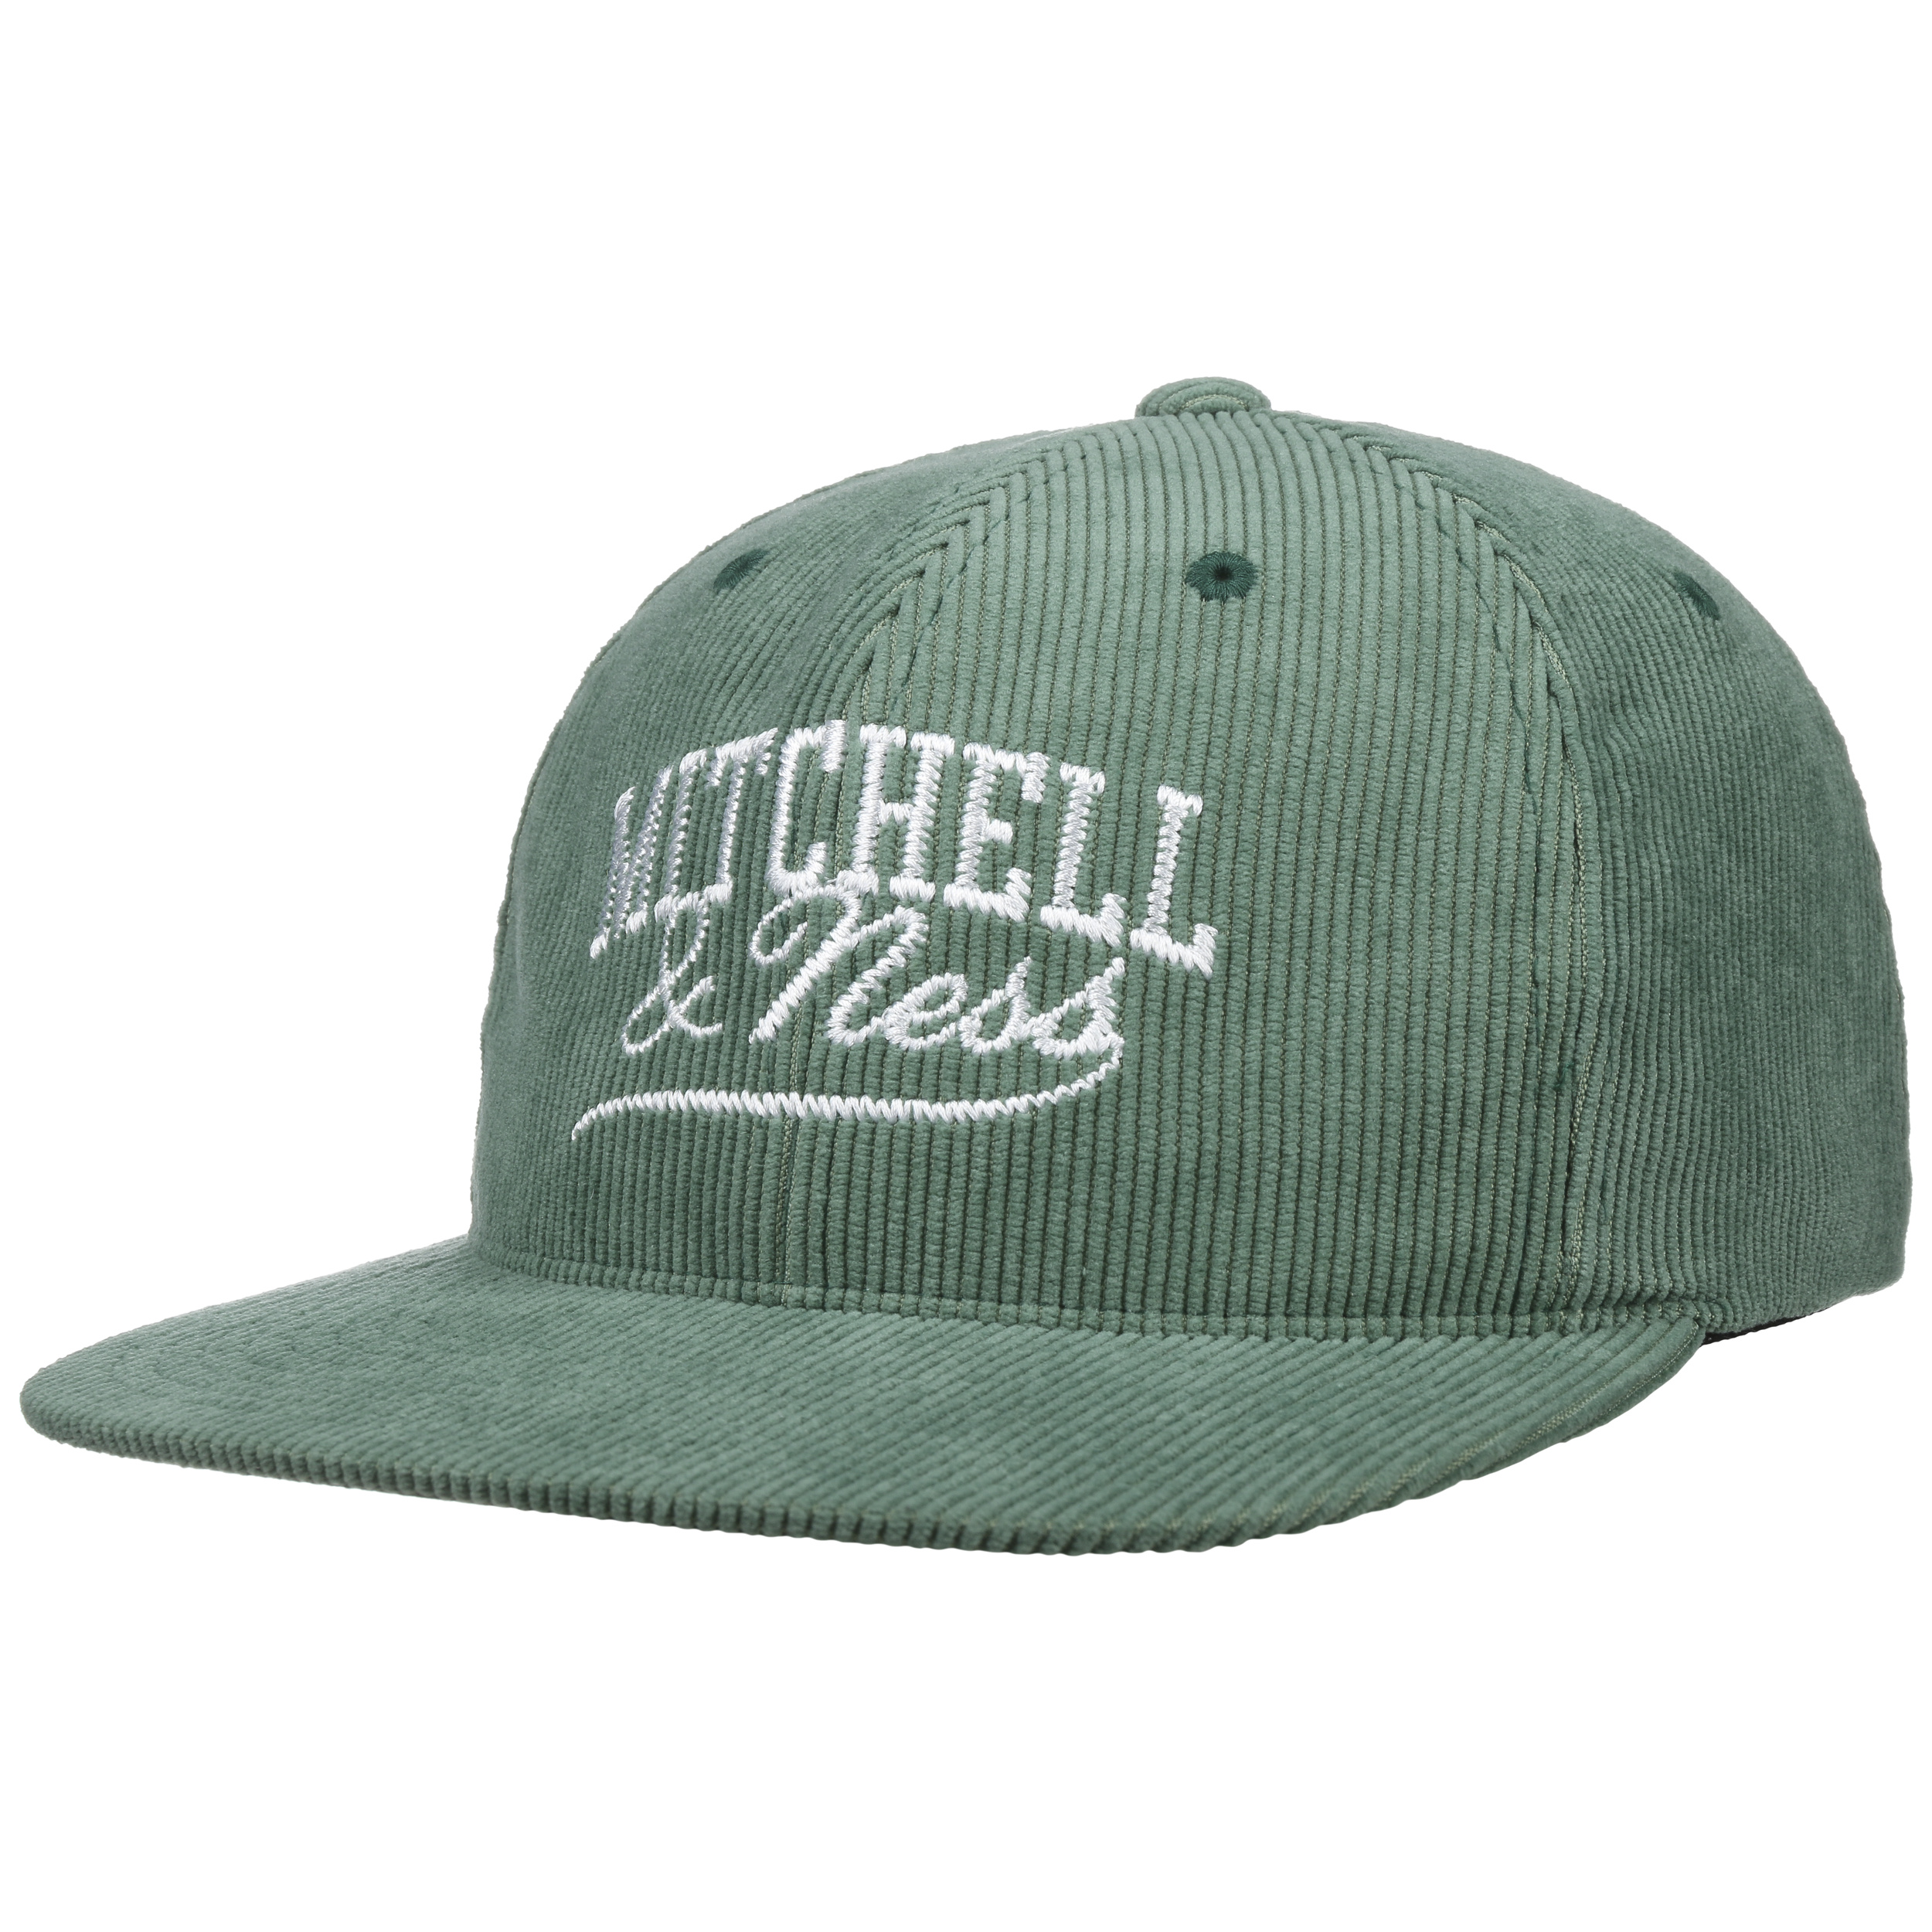 Summer Cord Brand Cap by Ness & Mitchell - 36,95 €